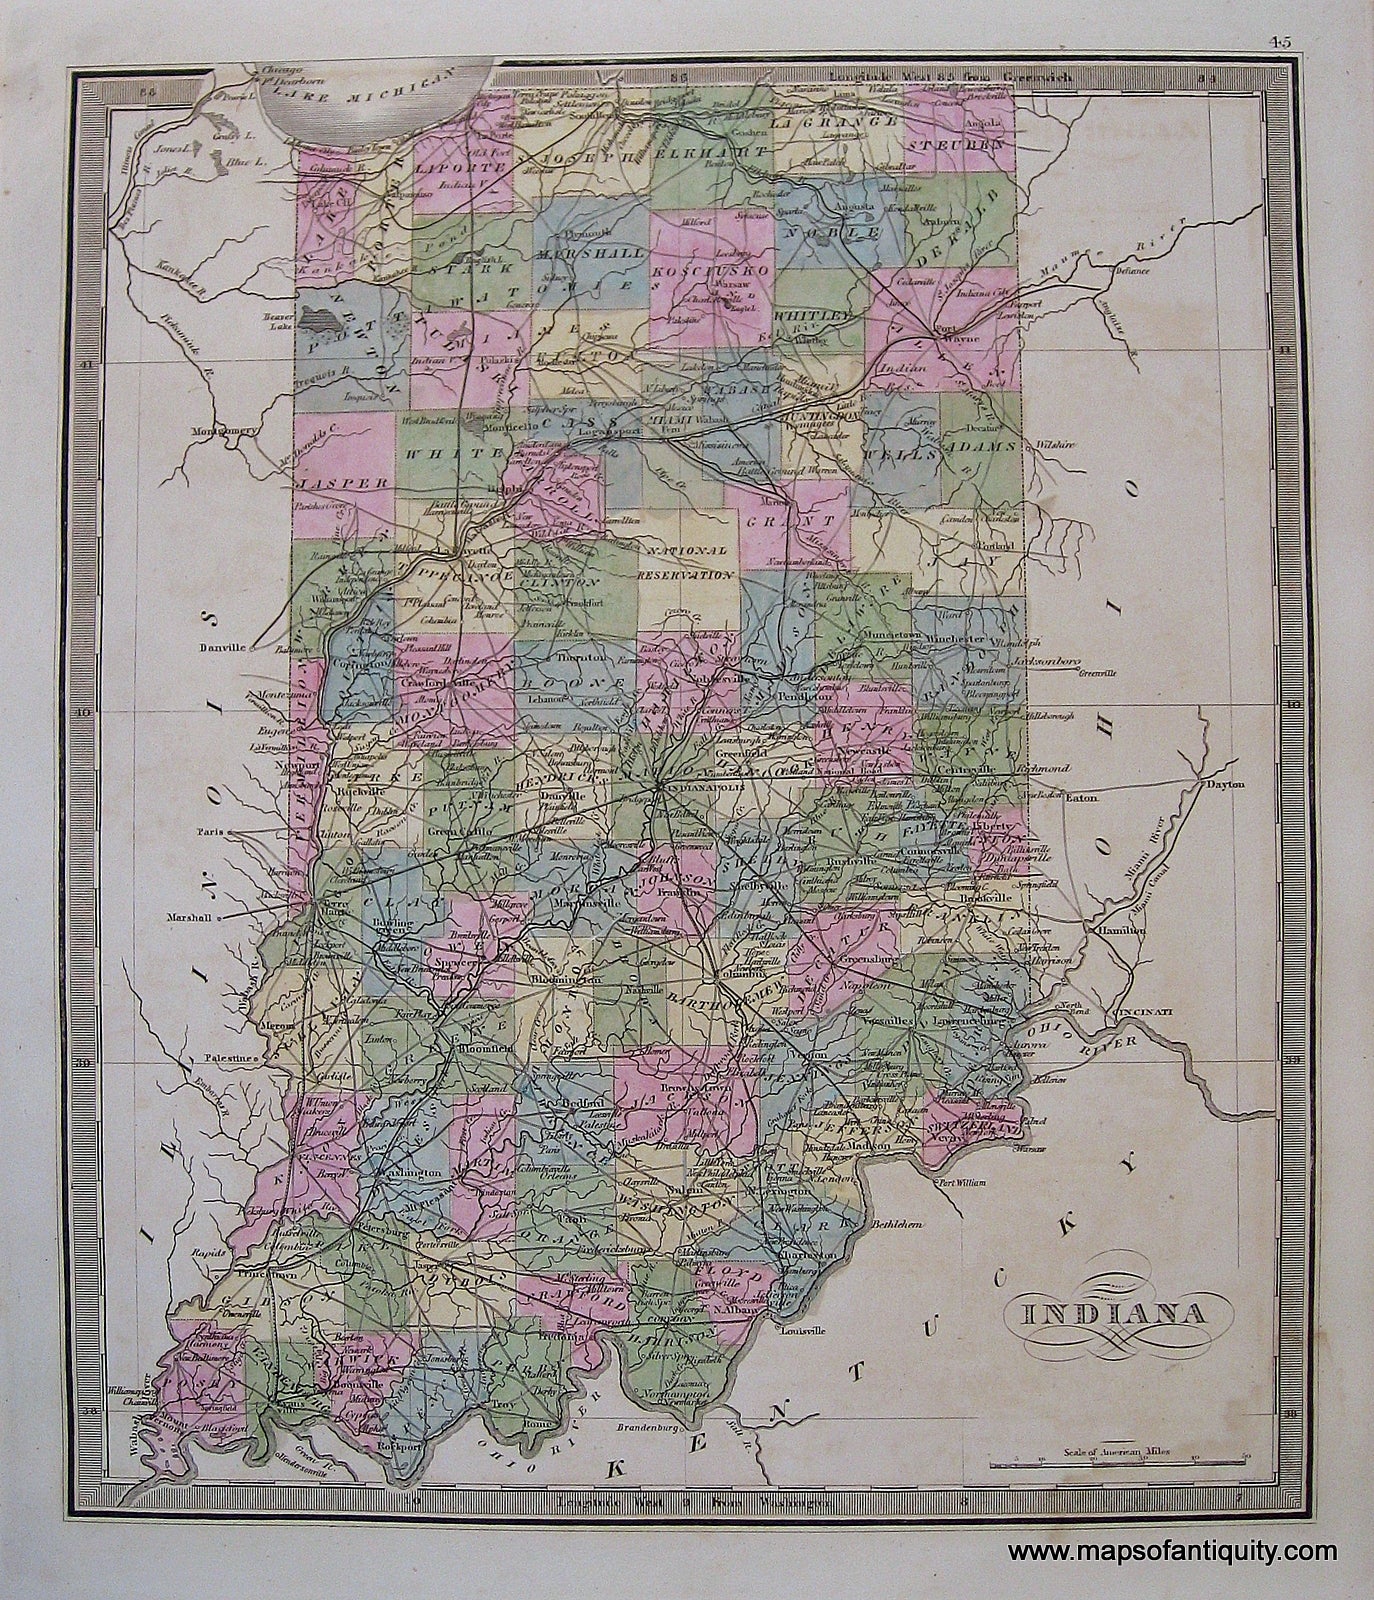 Antique-Hand-Colored-Map-Indiana-United-States-Midwest-1848-Jeremiah-Greenleaf-Maps-Of-Antiquity